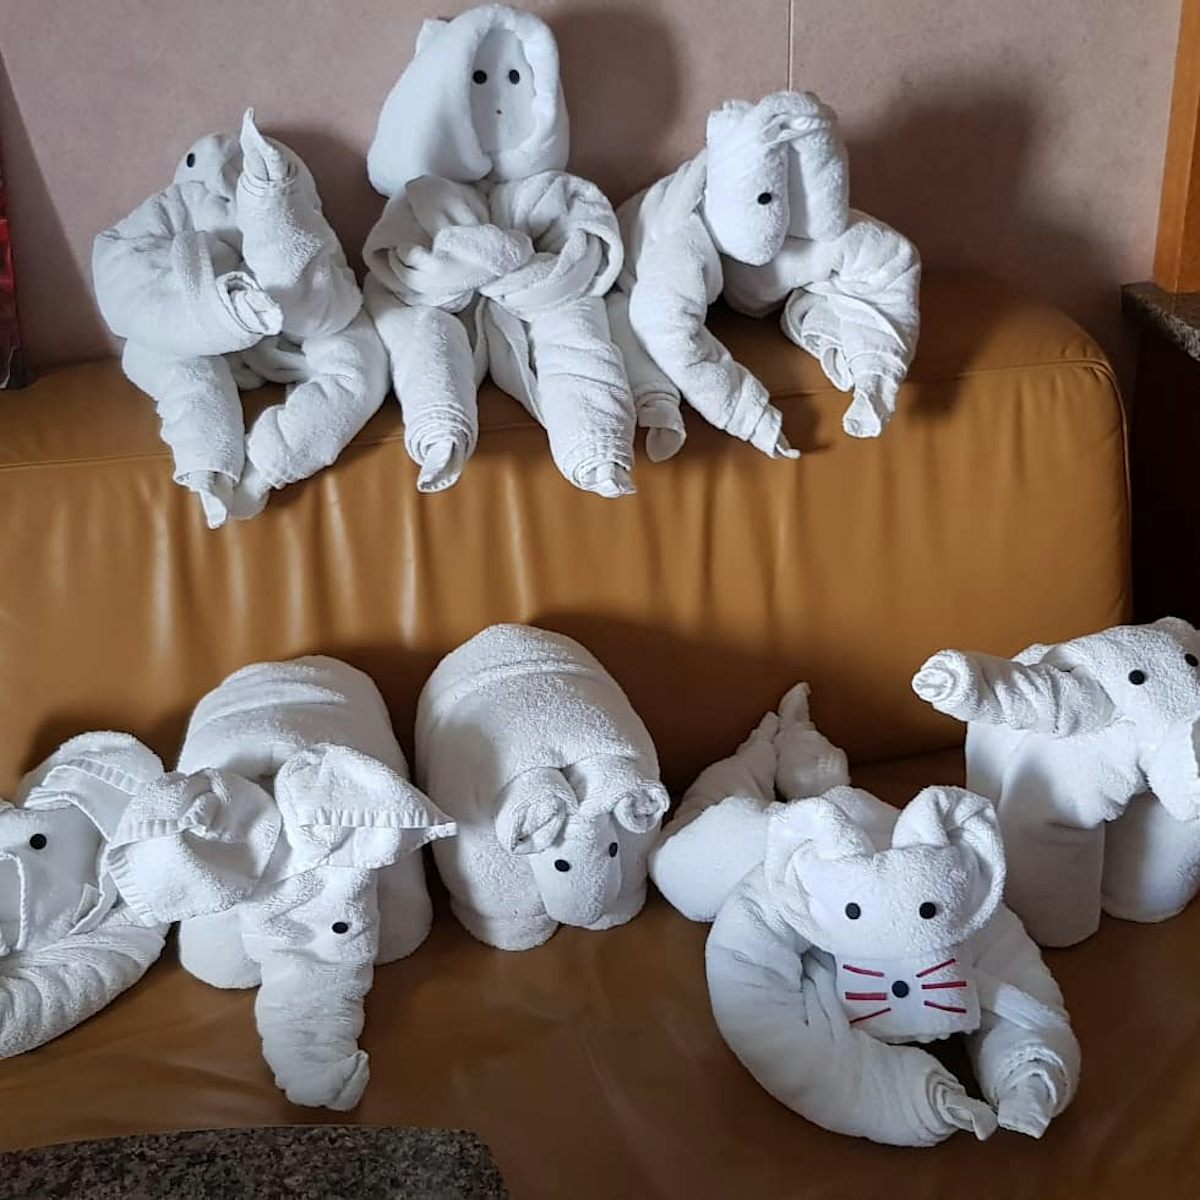 Our animal towels for each day of our new Zealand cruise.  